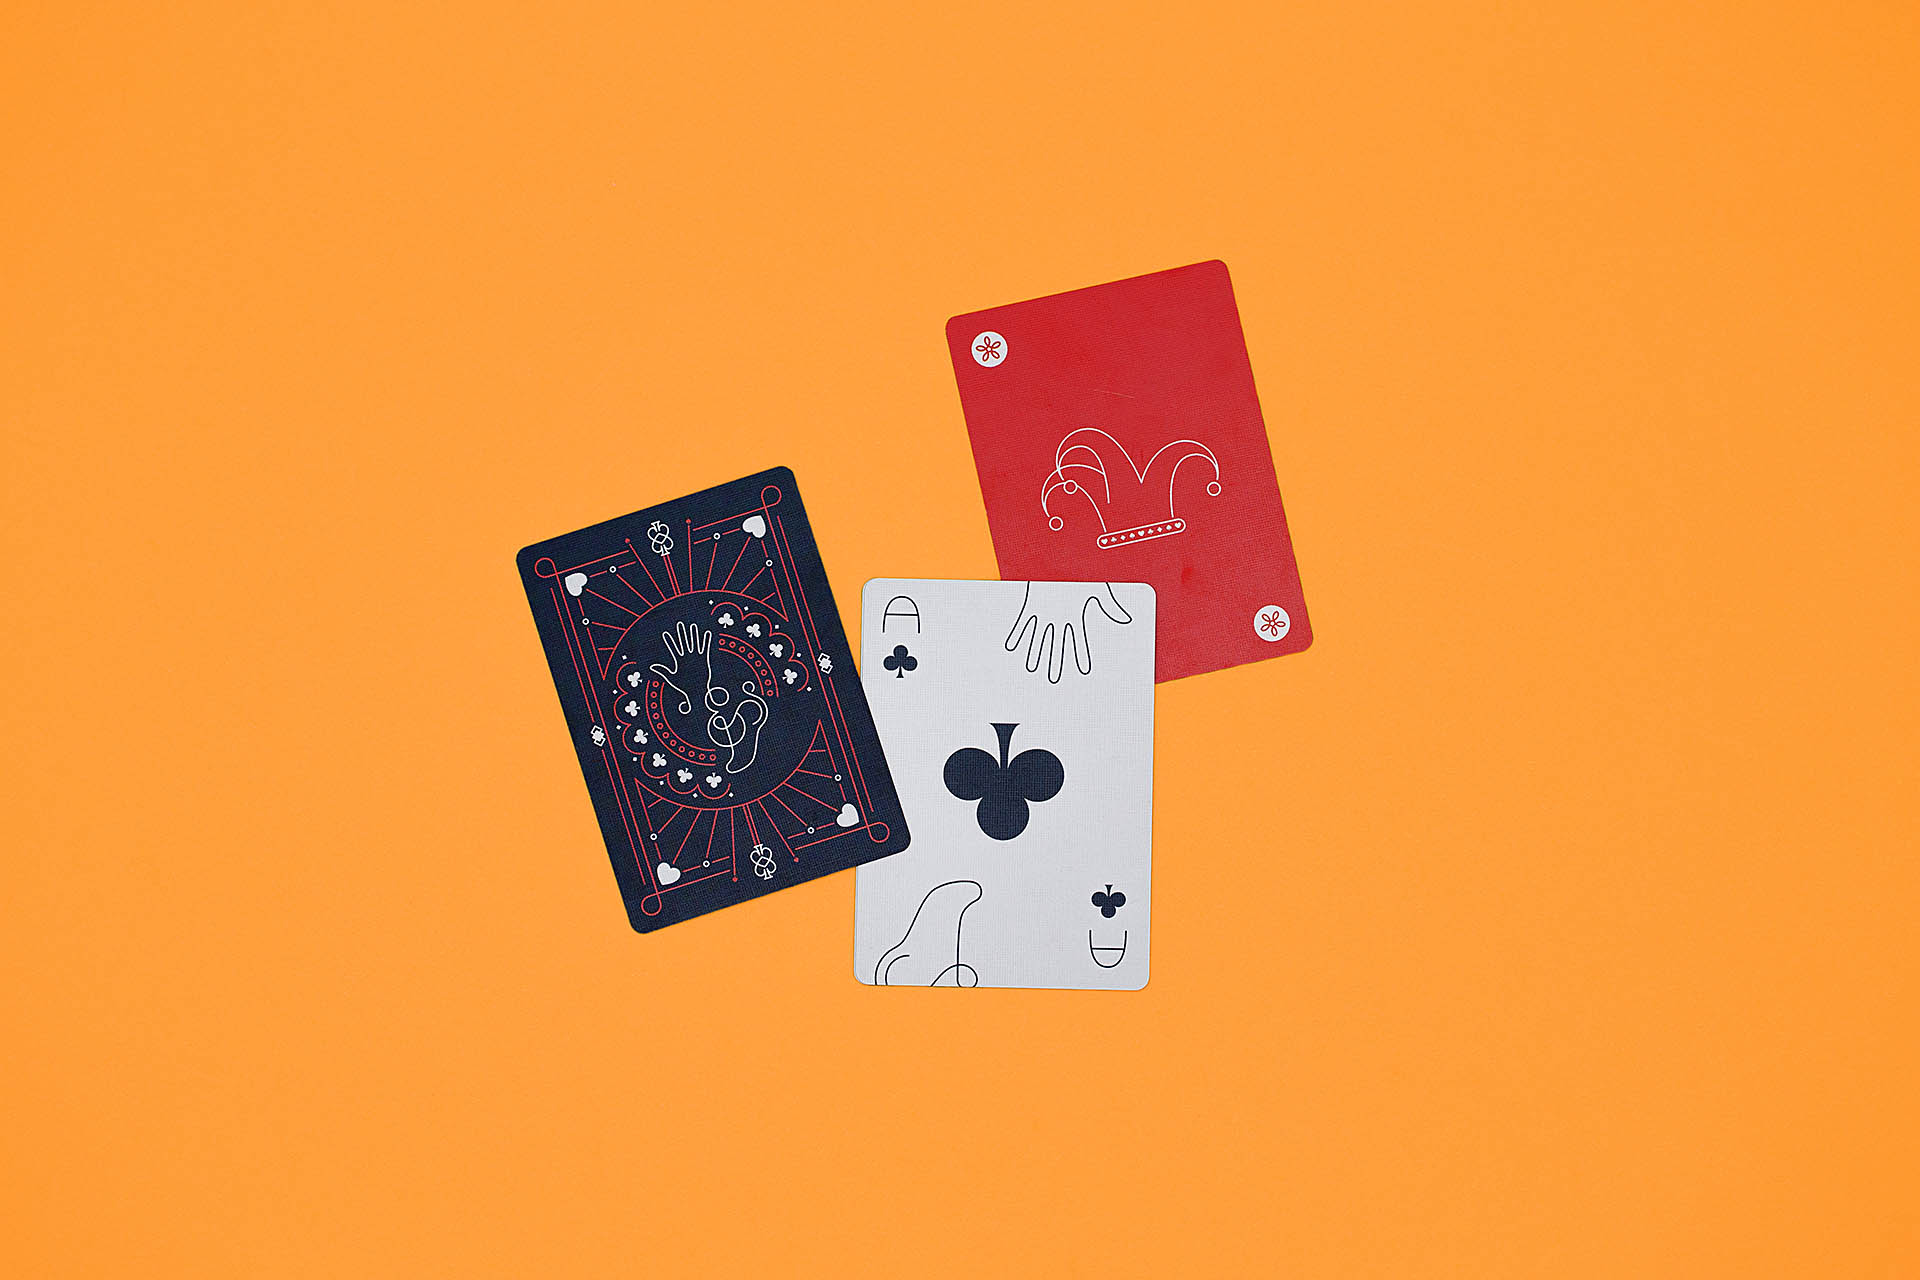 A dark gray card, ace of clubs face-up, and red joker face-up on an orange background